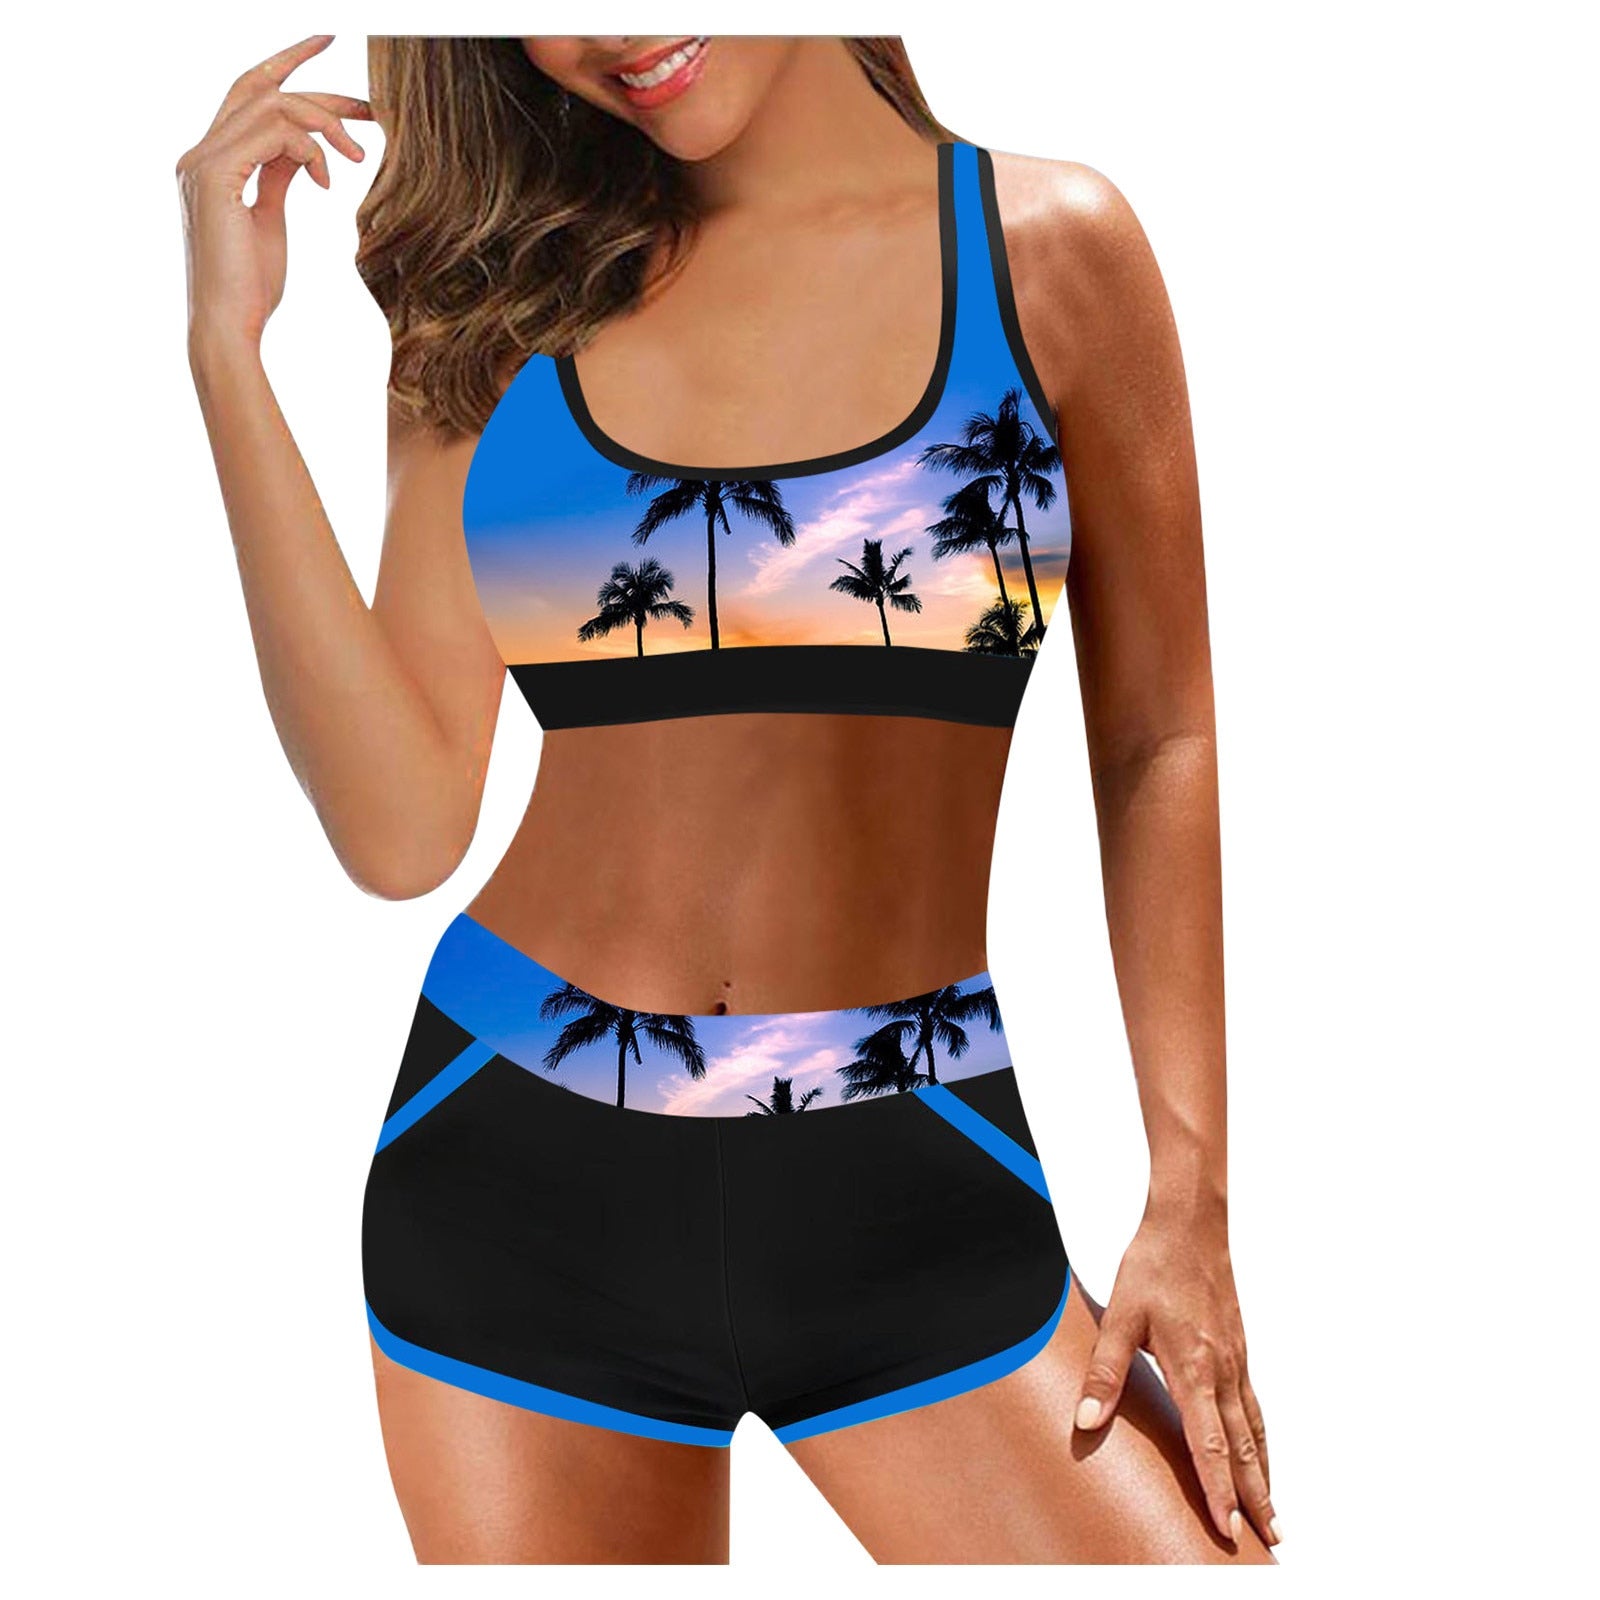 Women's Sexy High Waist Split Print Push Up Bikini Swim Top And Shorts Colors C & D Sizes S-XXL Brought To You By Officially Sexy